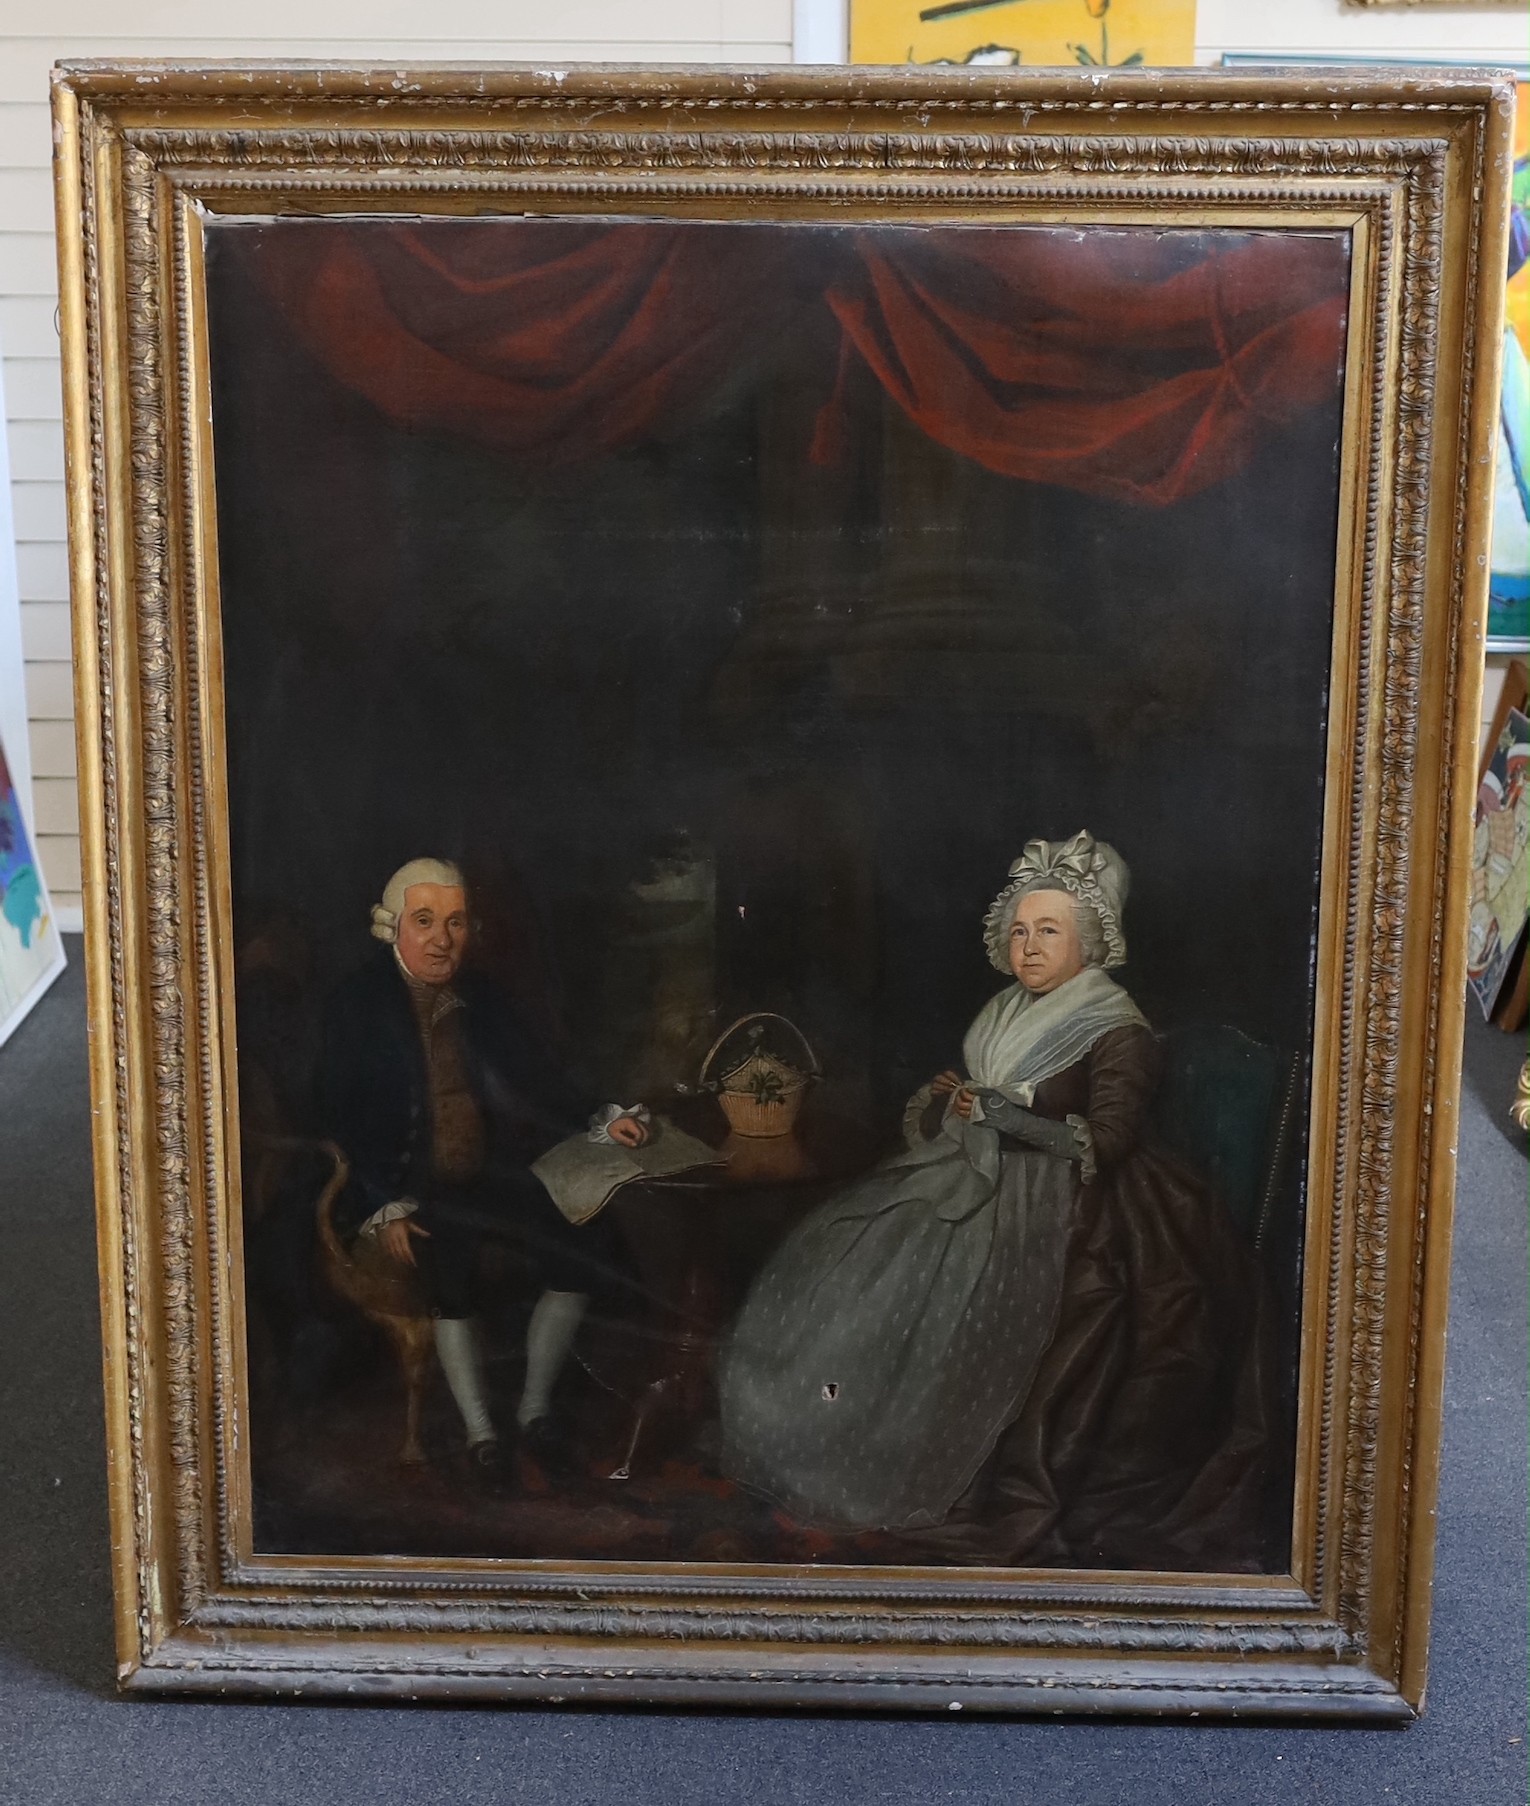 Late 18th Century English School, Full length portrait of Sir James Esdaile (1714-1793) and Elizabeth Pate, seated at table with columns, drapery, and a garden beyond, oil on canvas, 124 x 99cm